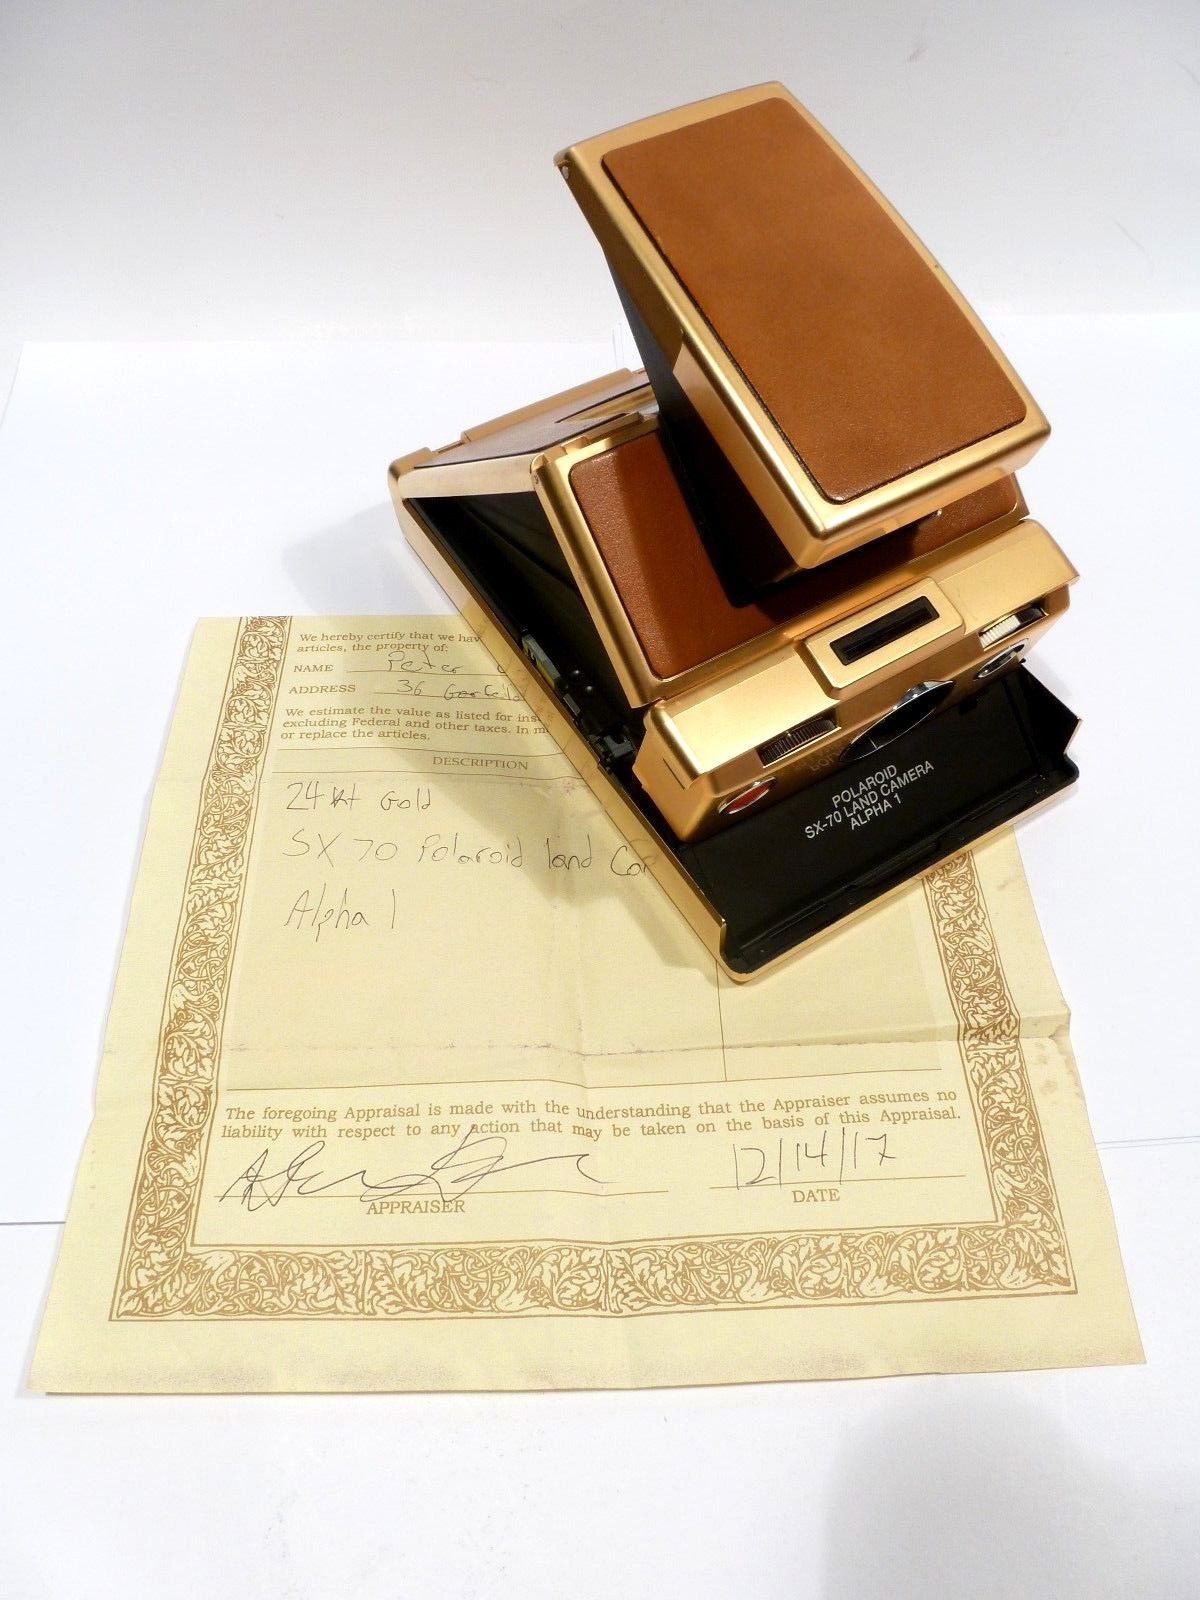 boom los van West This 24k Gold Plated Polaroid SX-70 Would Make You Feel Like Royalty